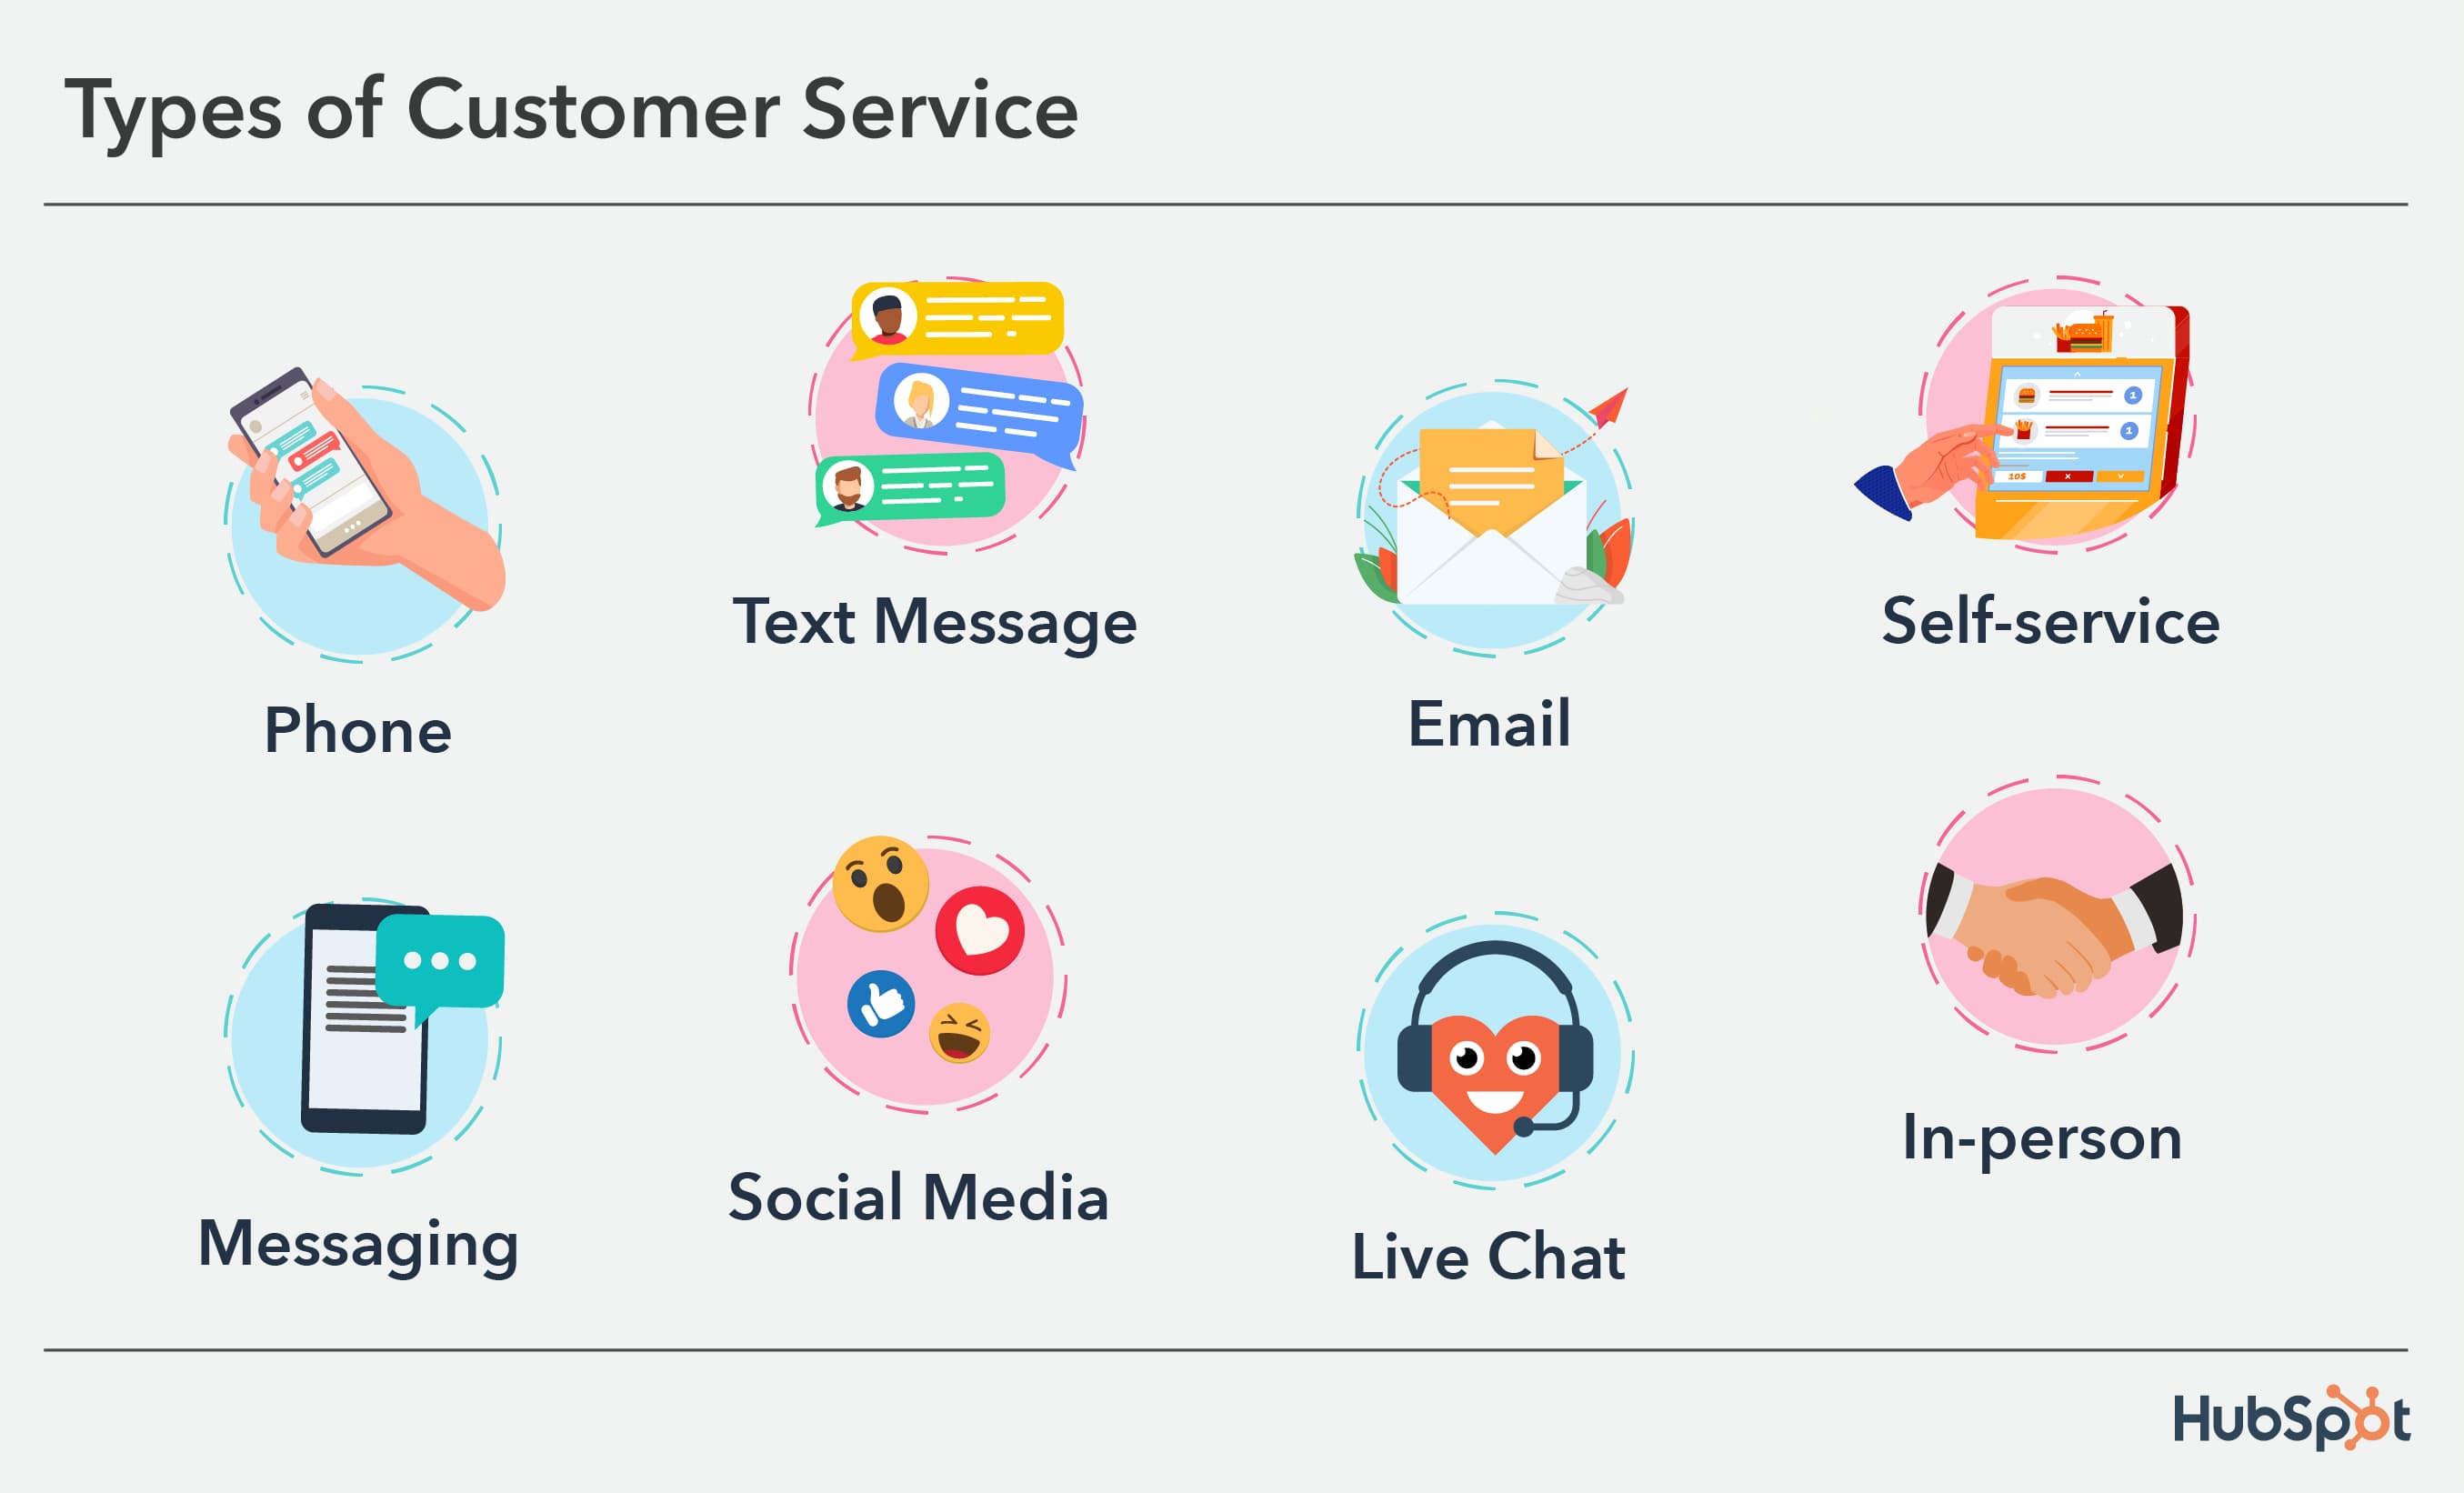 According to HubSpot, the types of customer service include phone, text message, email, self-service, messaging, social media, live chat, and in-person.